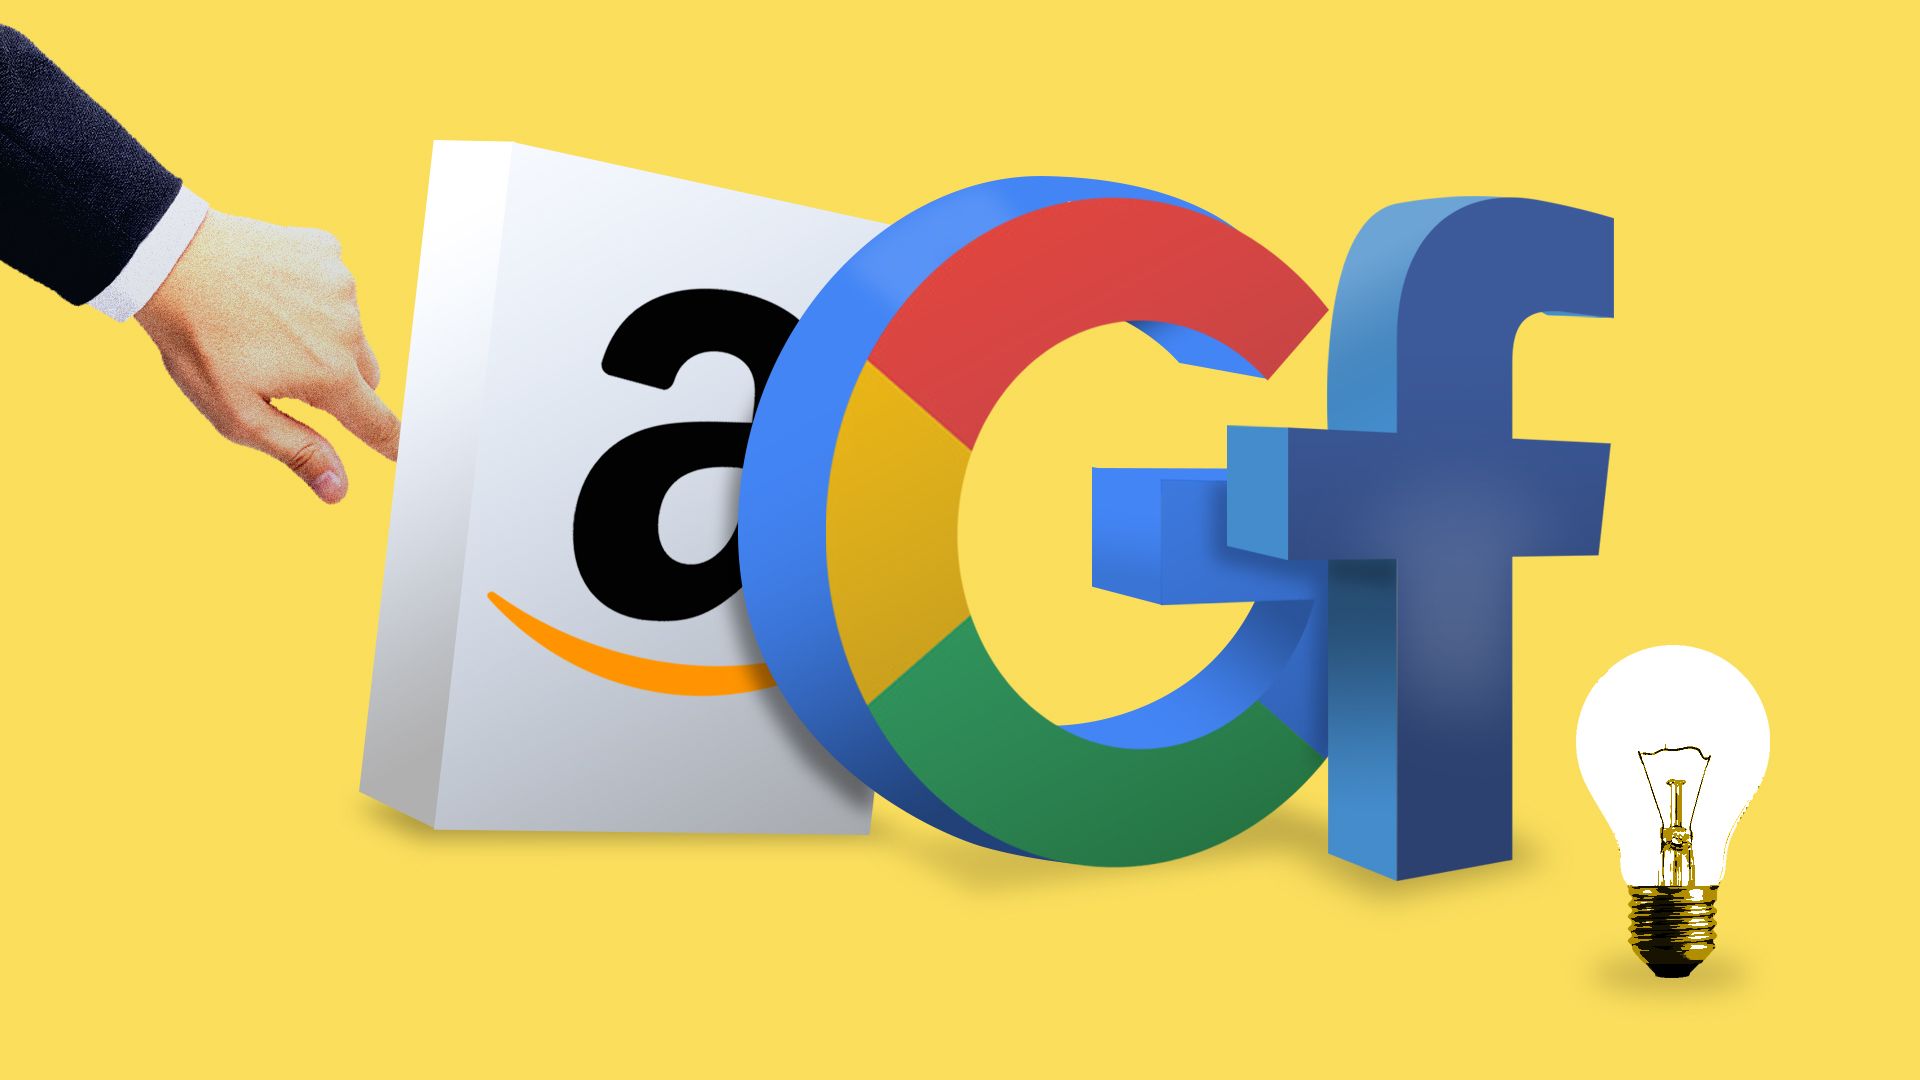 In this image, the Amazon, Google, and Facebook logos are portrayed